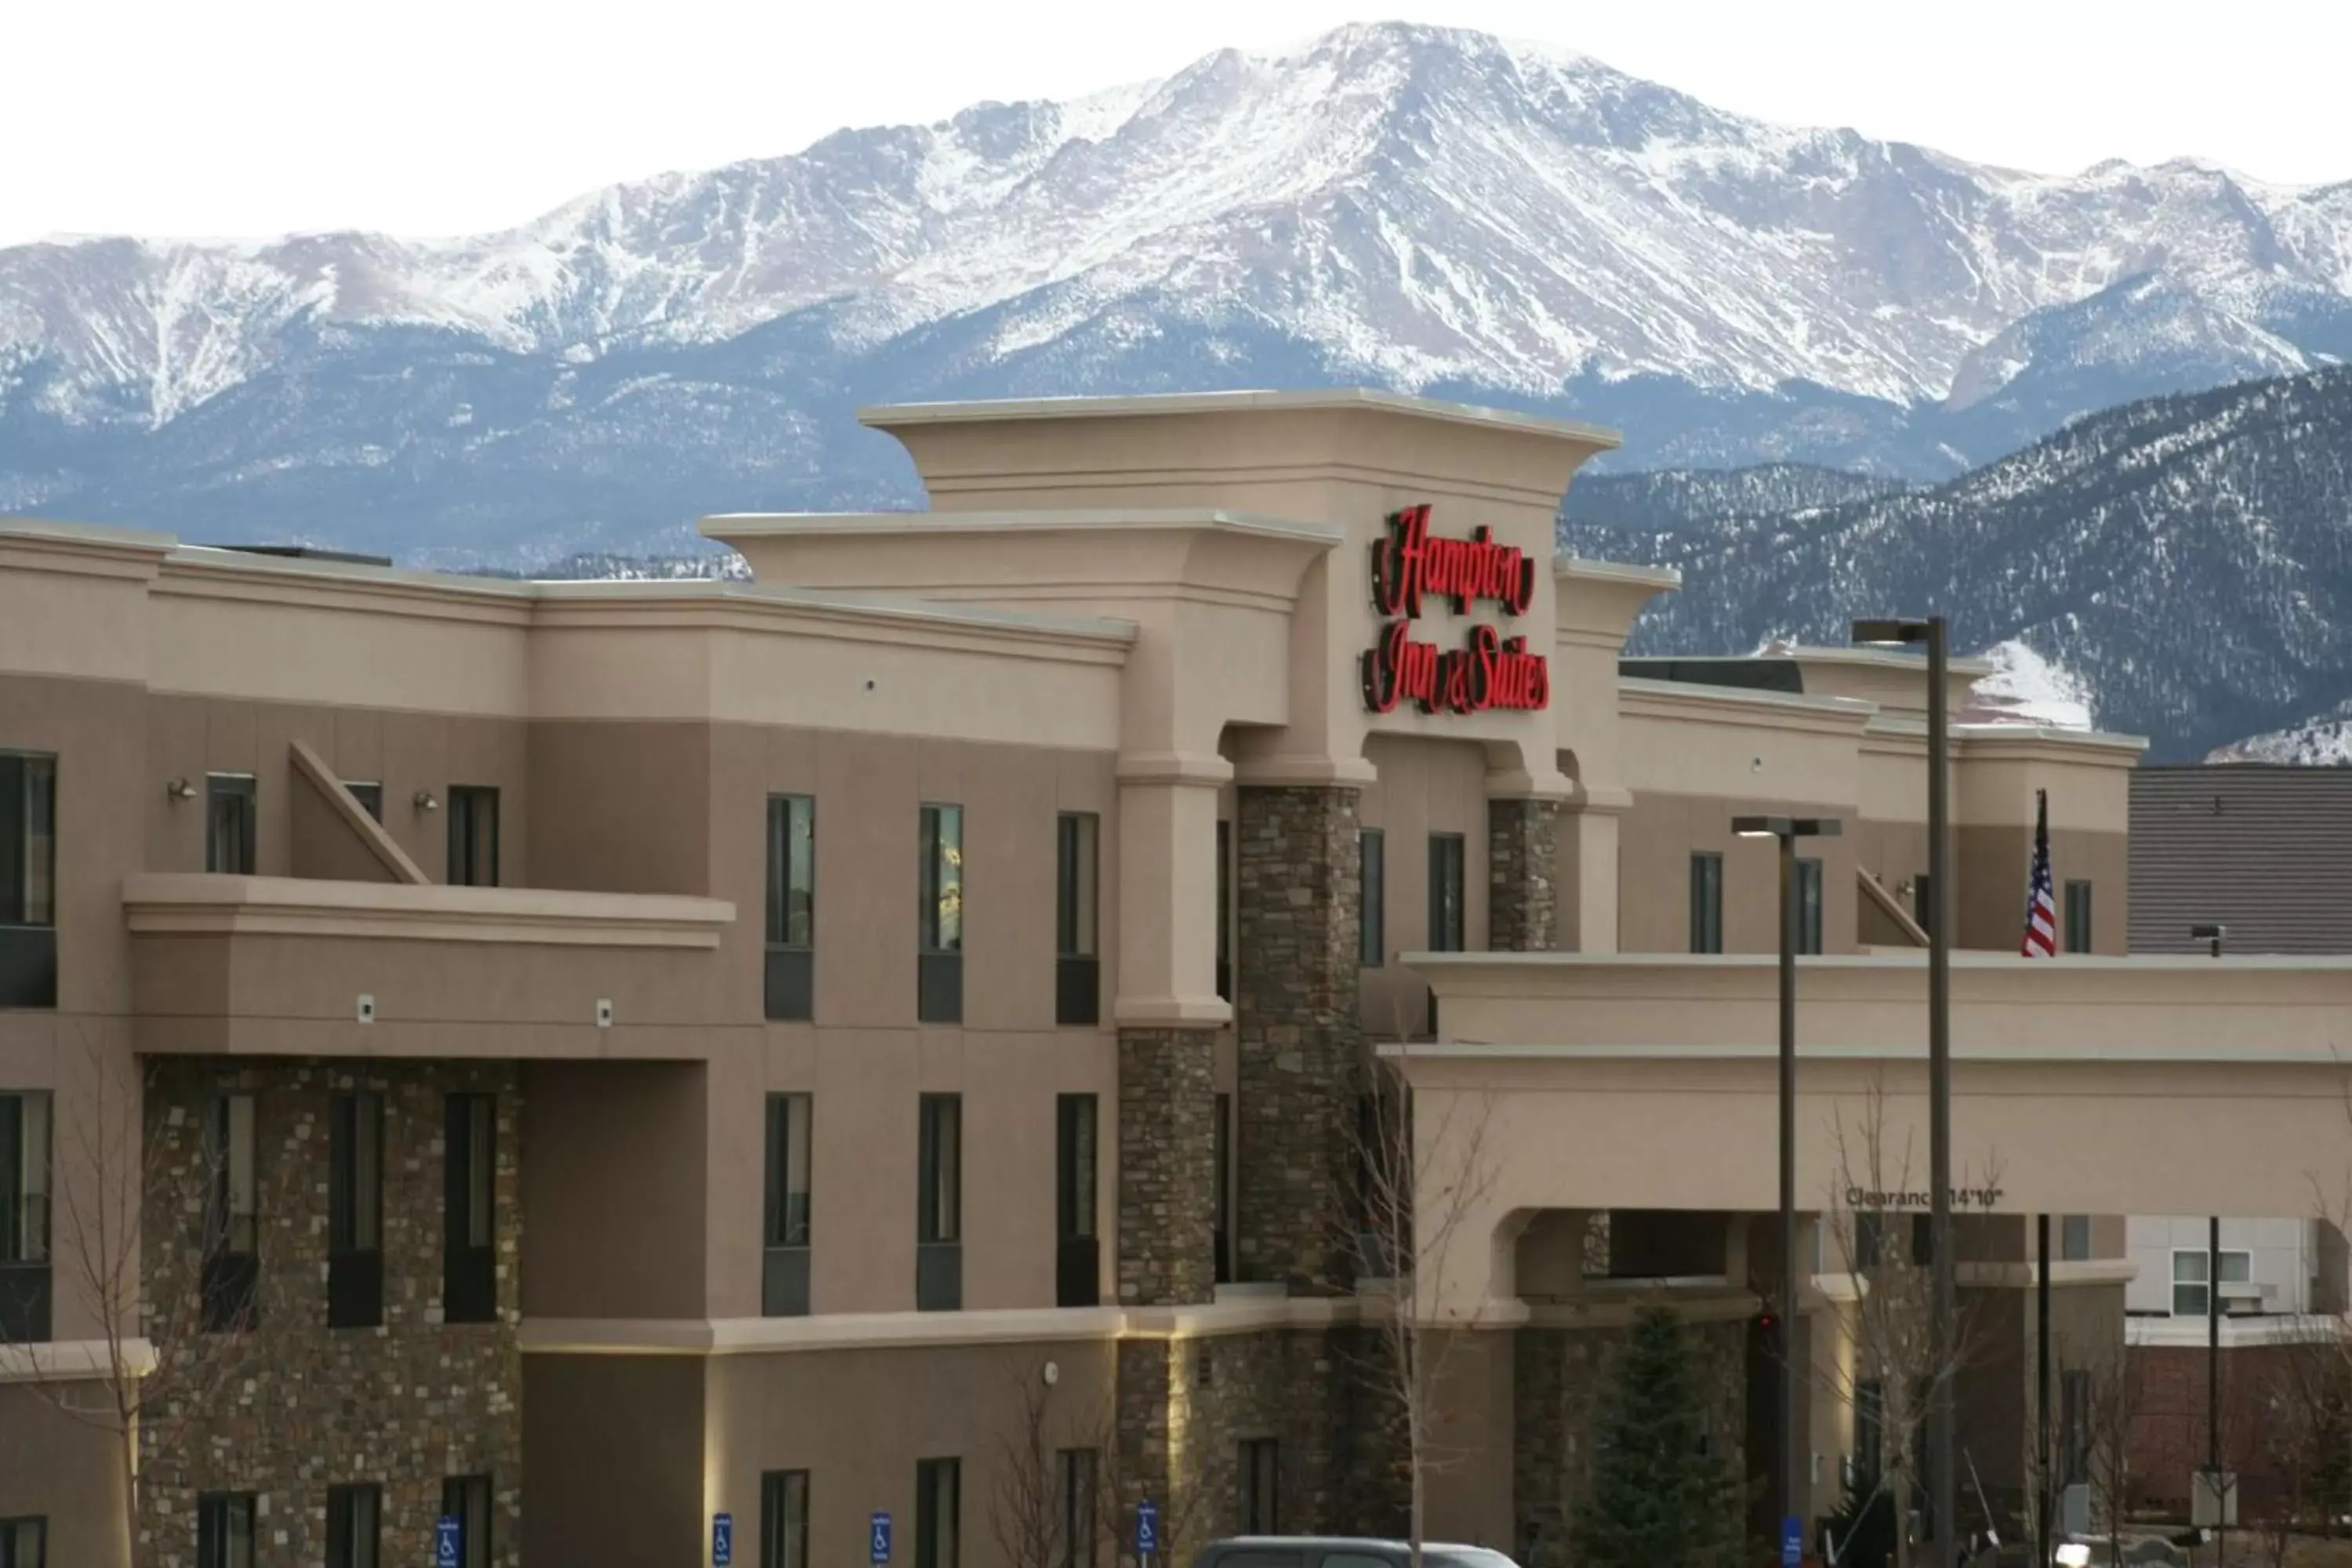 Property Building in Hampton Inn & Suites Colorado Springs-Air Force Academy/I-25 North